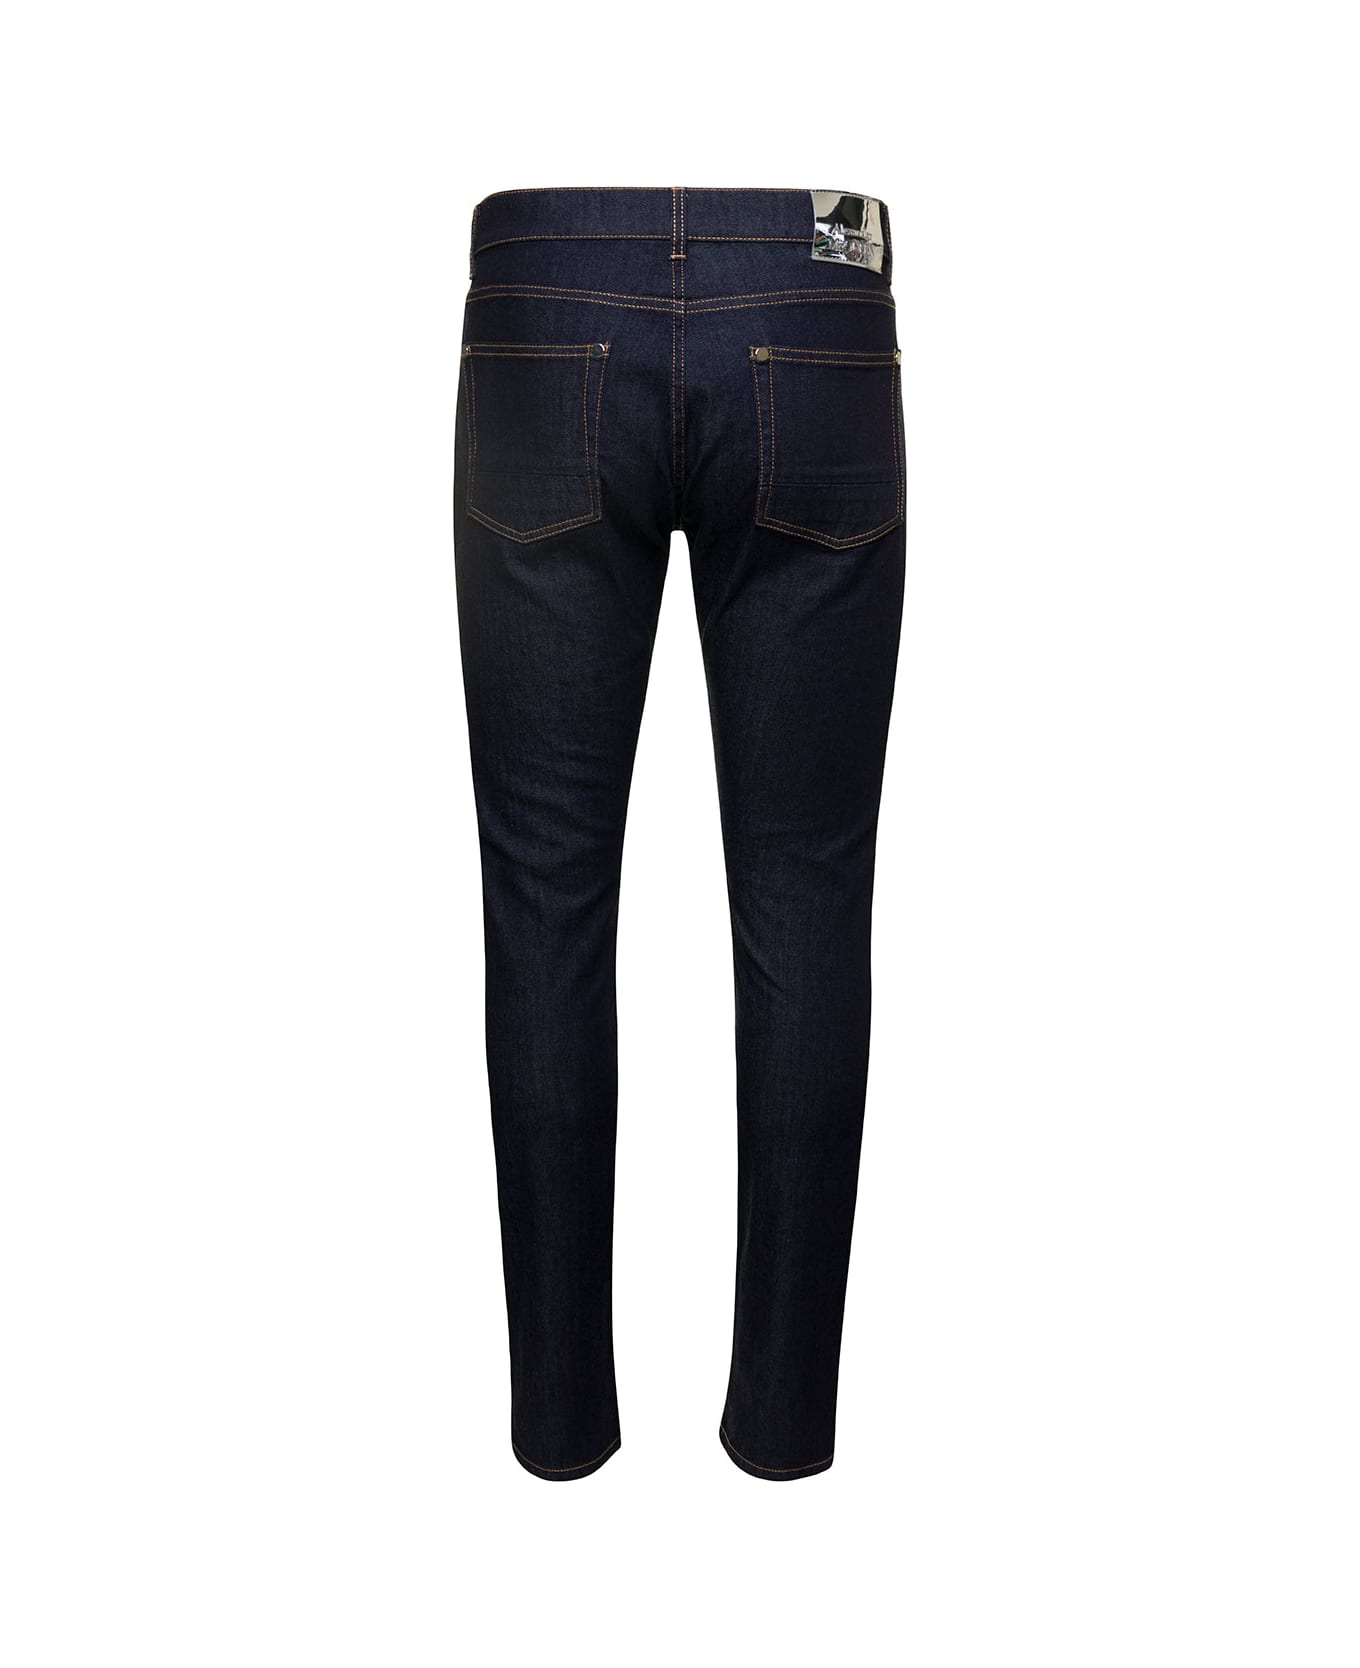 Alexander McQueen Blue Tight Pants With Metallic Logo Patch And Contrasting Stitching In Cotton Denim Man - Blu デニム